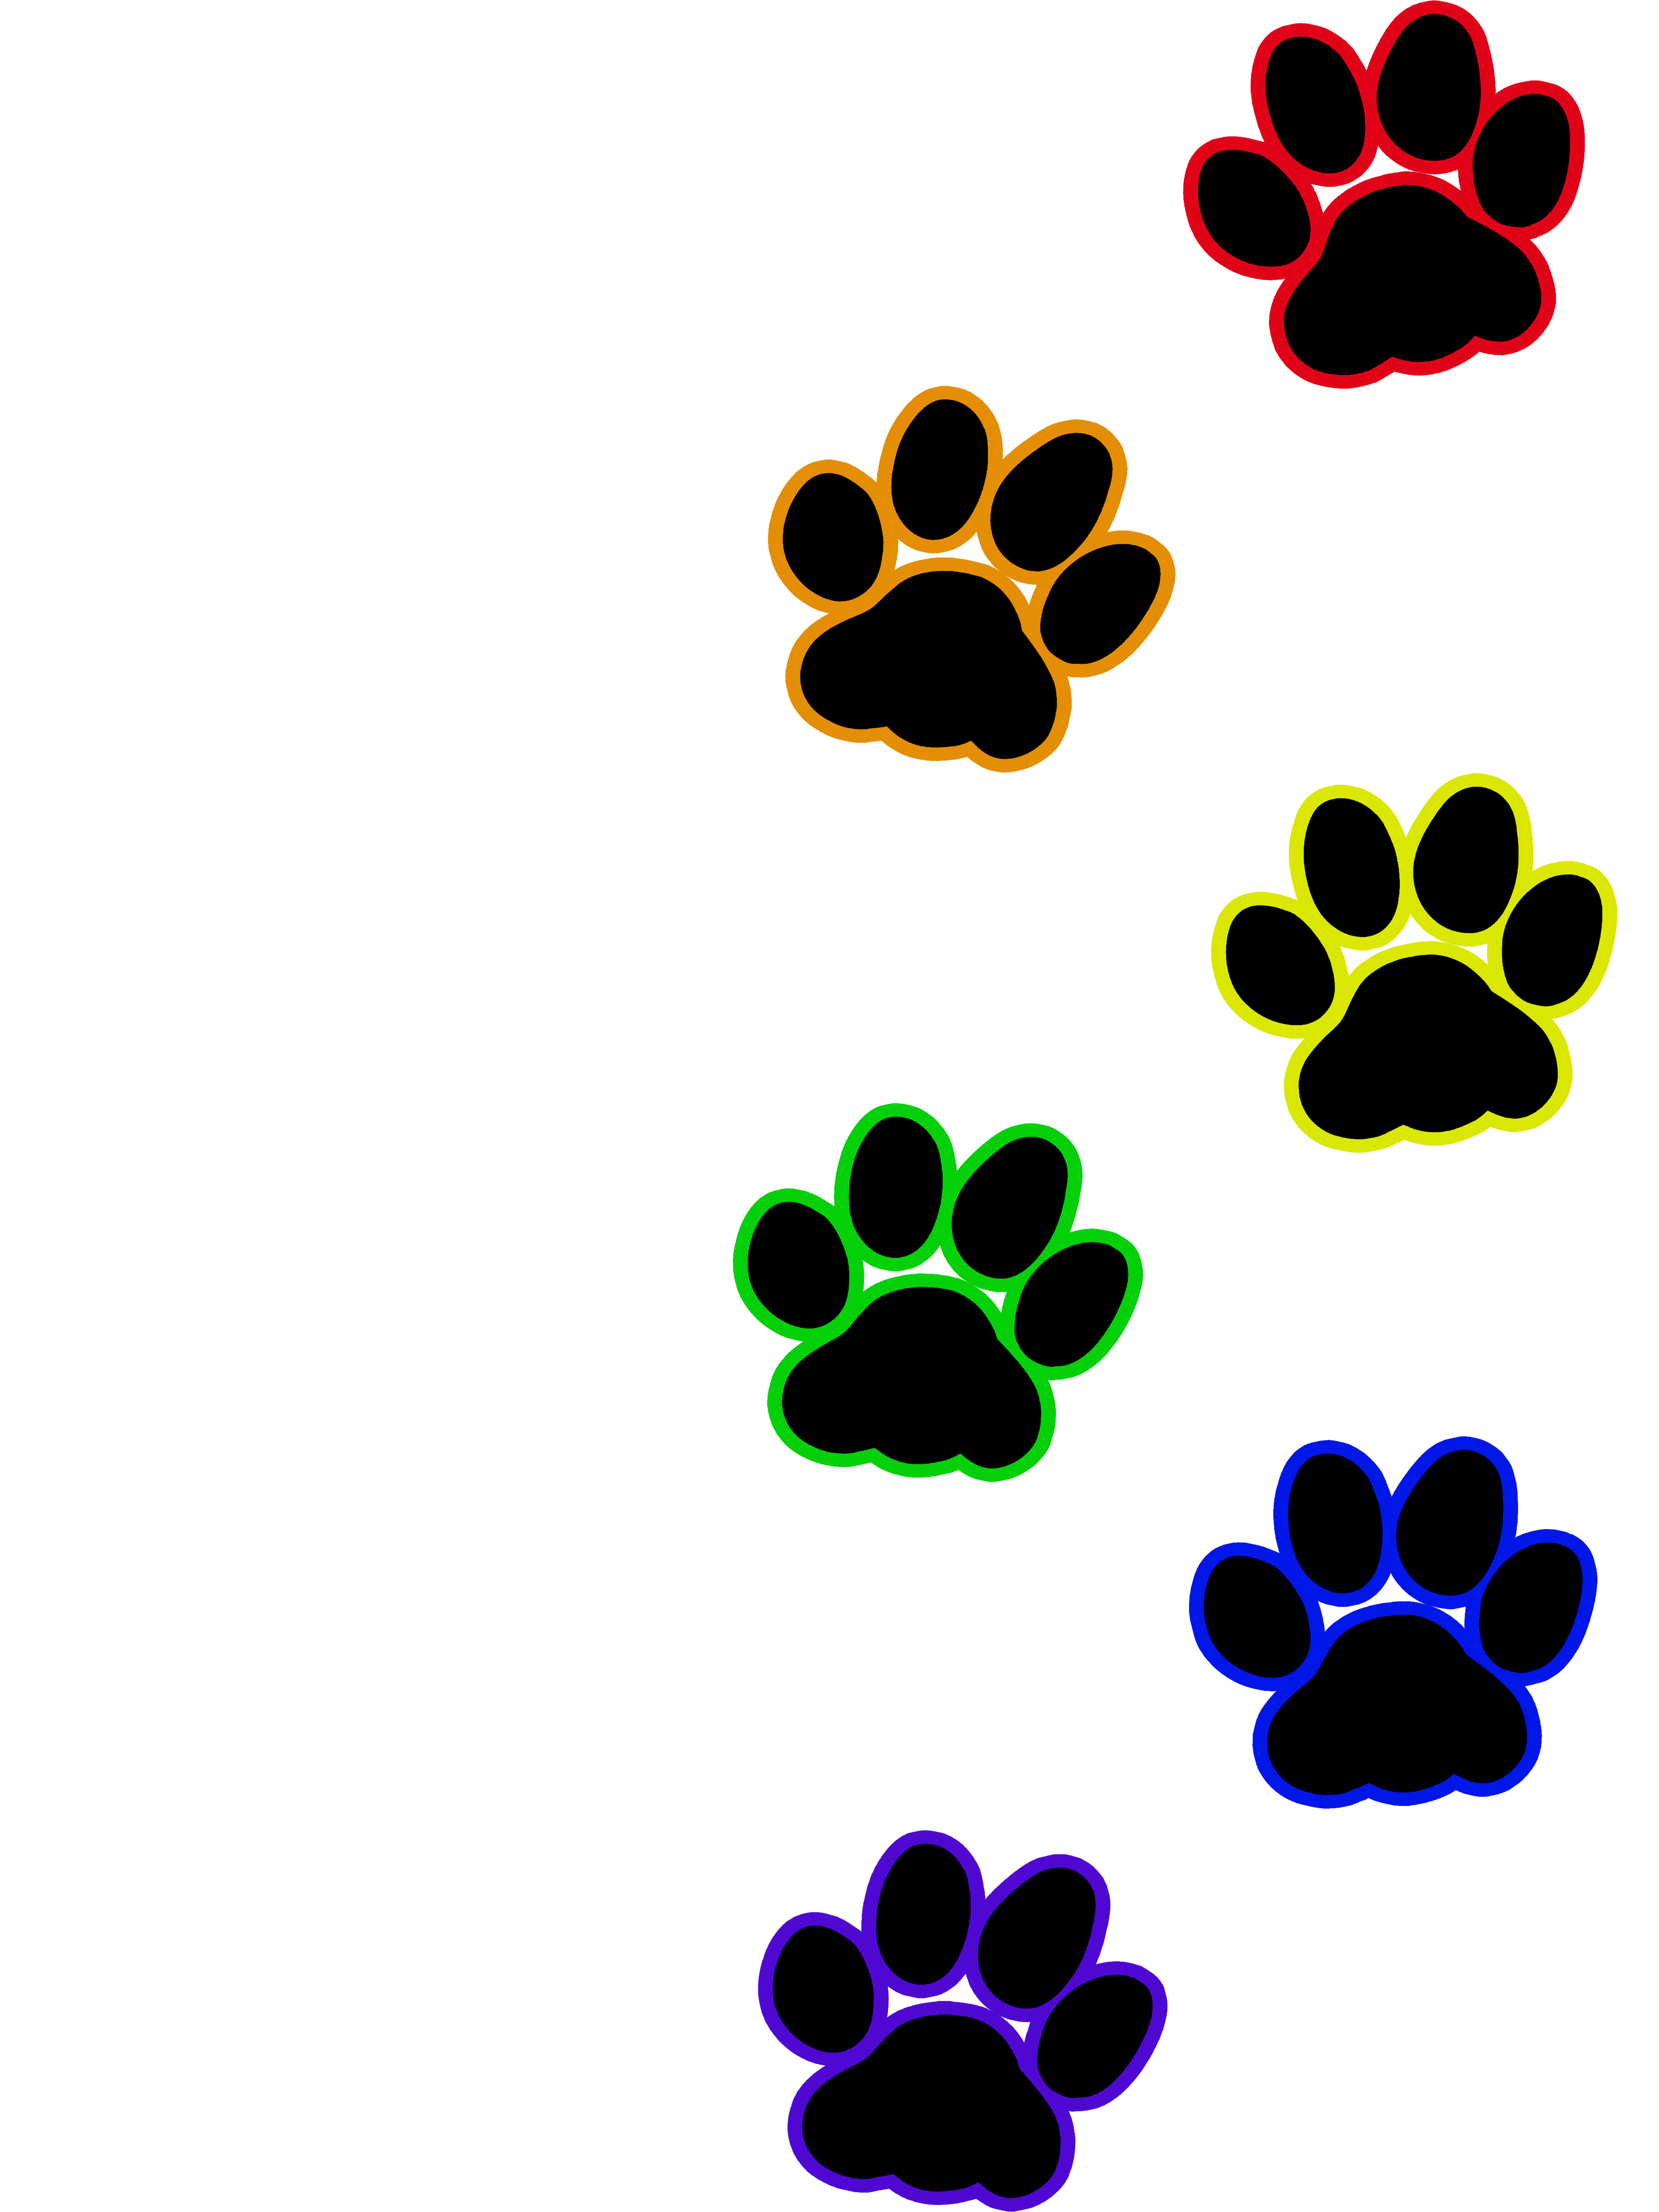 Cat Paw Print Wallpapers Top Free Cat Paw Print Backgrounds Wallpaperaccess